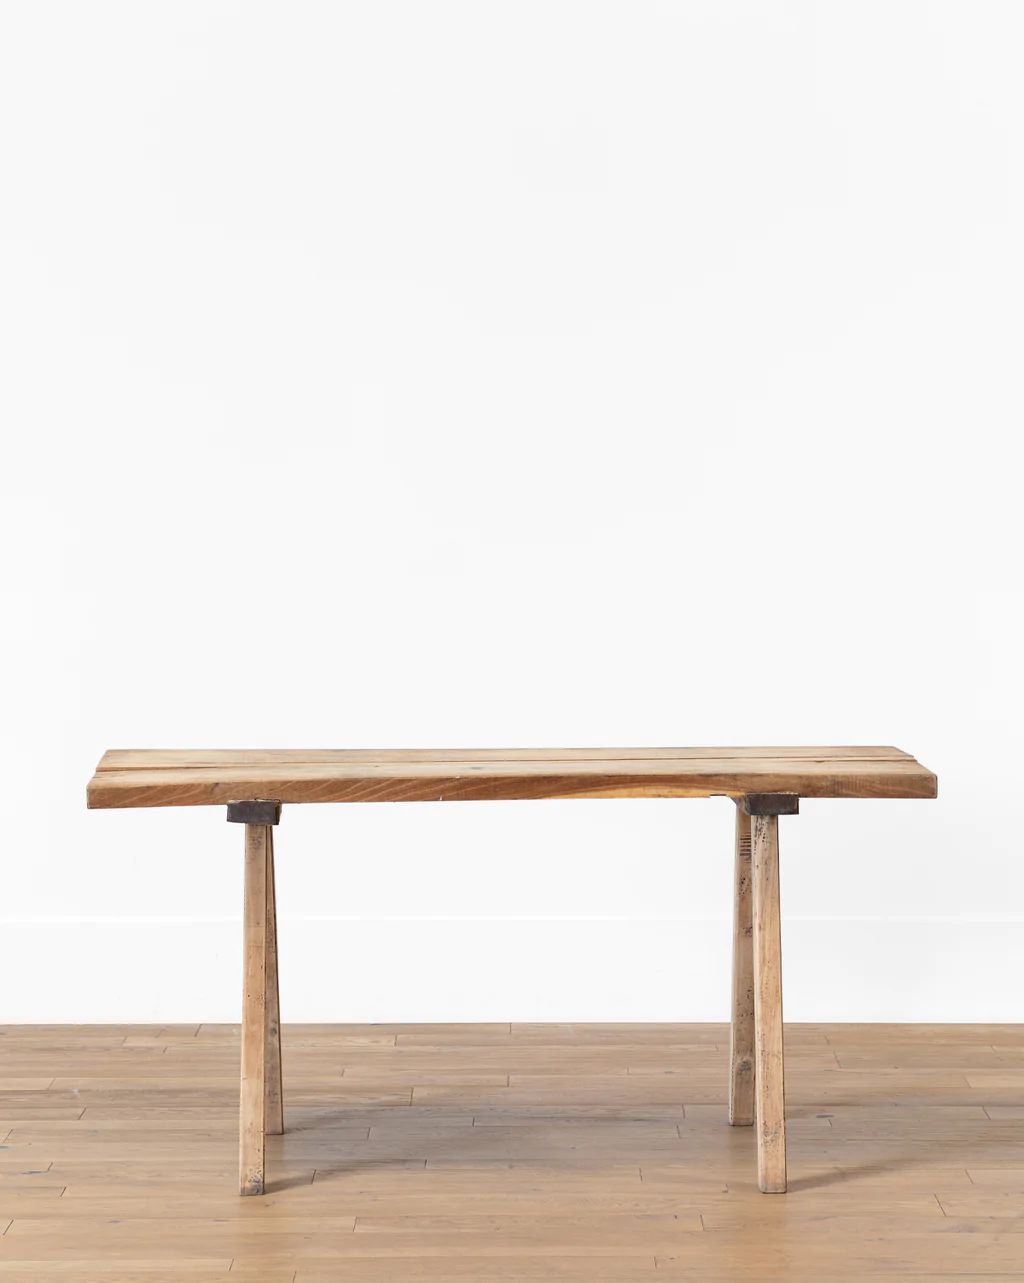 Vintage Distressed Wooden Console | McGee & Co.